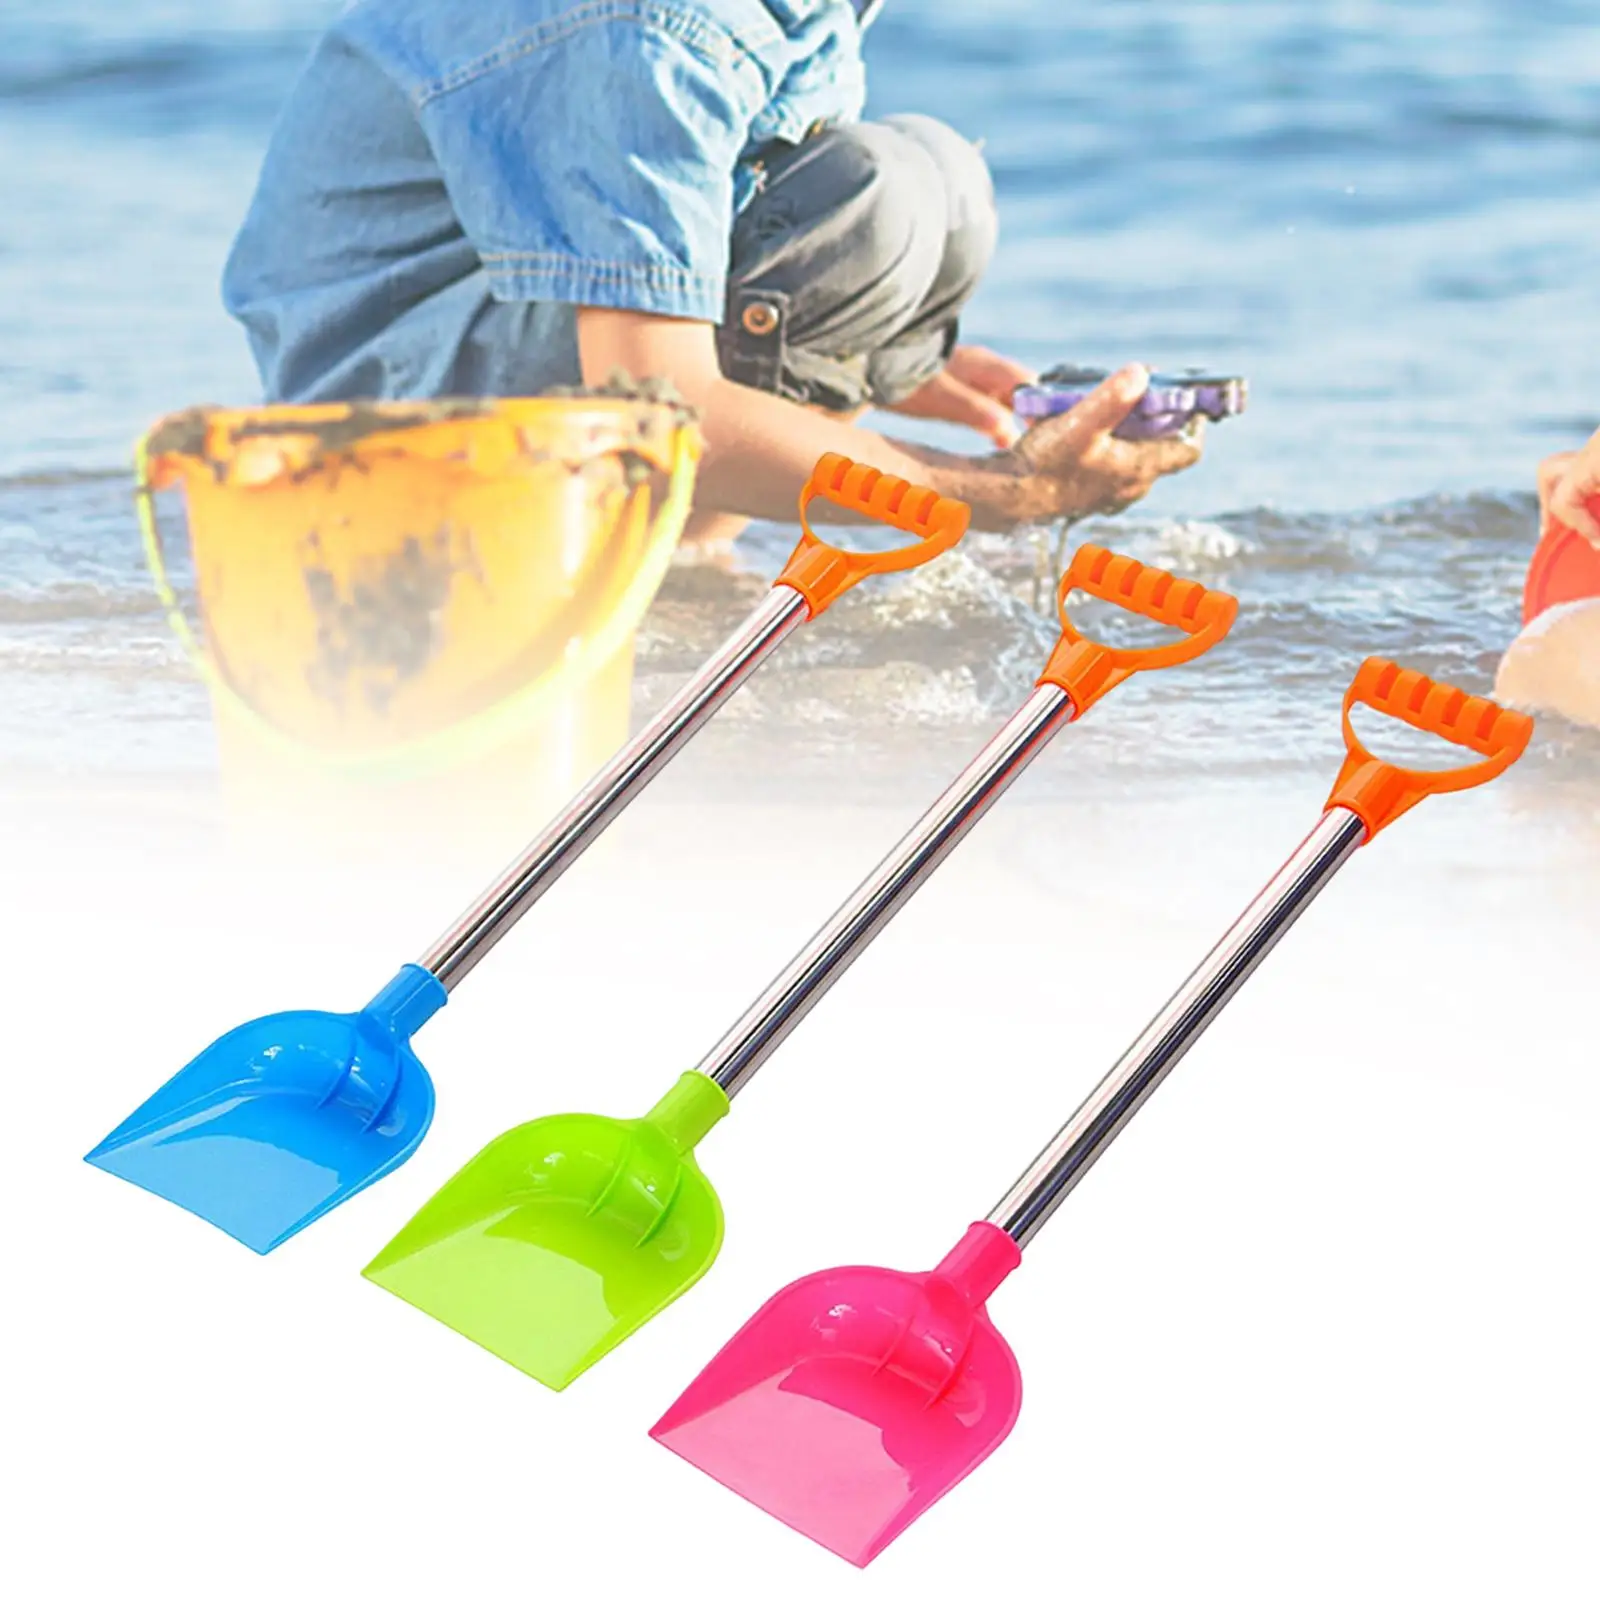 3x Child Beach Toys Gardening Tool Garden Toy Durable Outdoor Toy Portable for Outdoor Indoor Sand Sea Toddlers Boy Girl